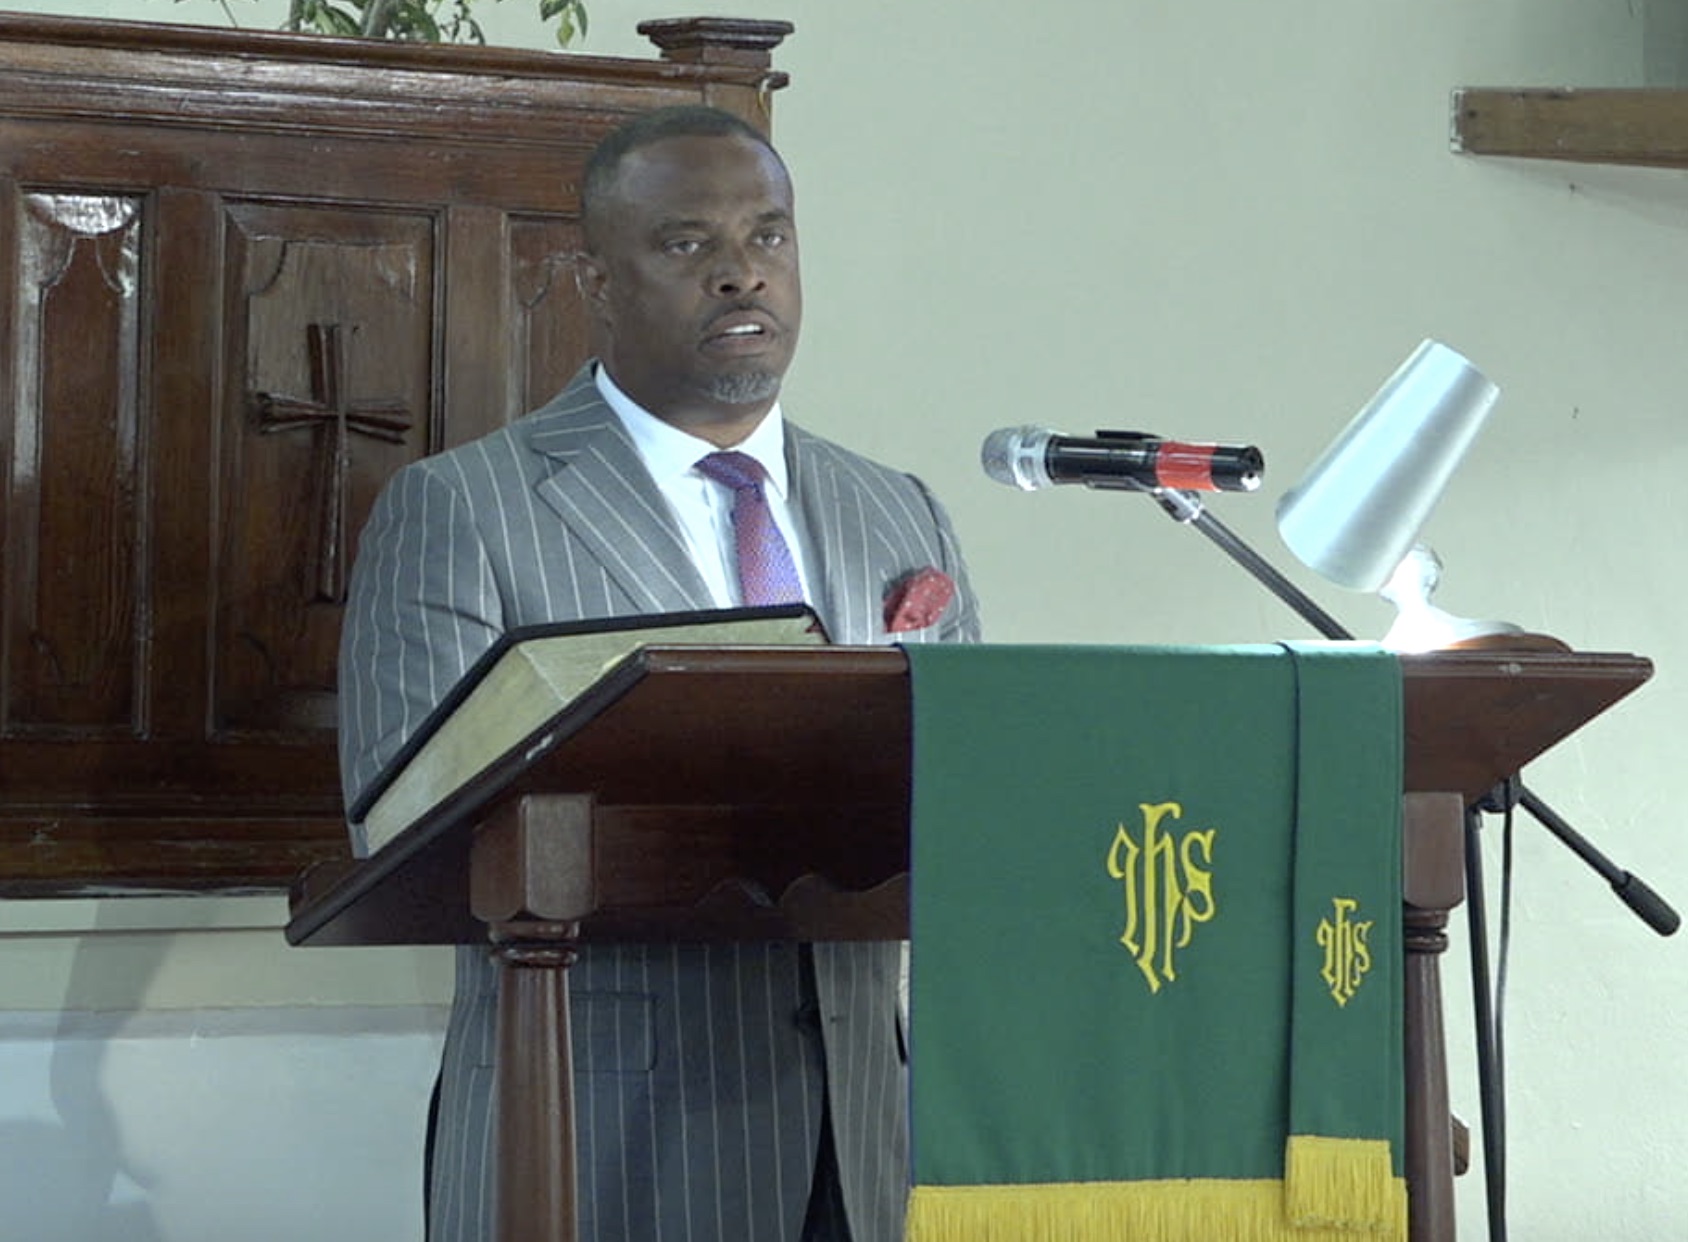 Hon. Mark Brantley, Premier of Nevis, and Minister of Foreign Affairs in St. Kitts and Nevis delivering remarks at a “United in Christ, Giving Thanks and Praise” church service at the Gingerland Methodist Church on July 19, 2020